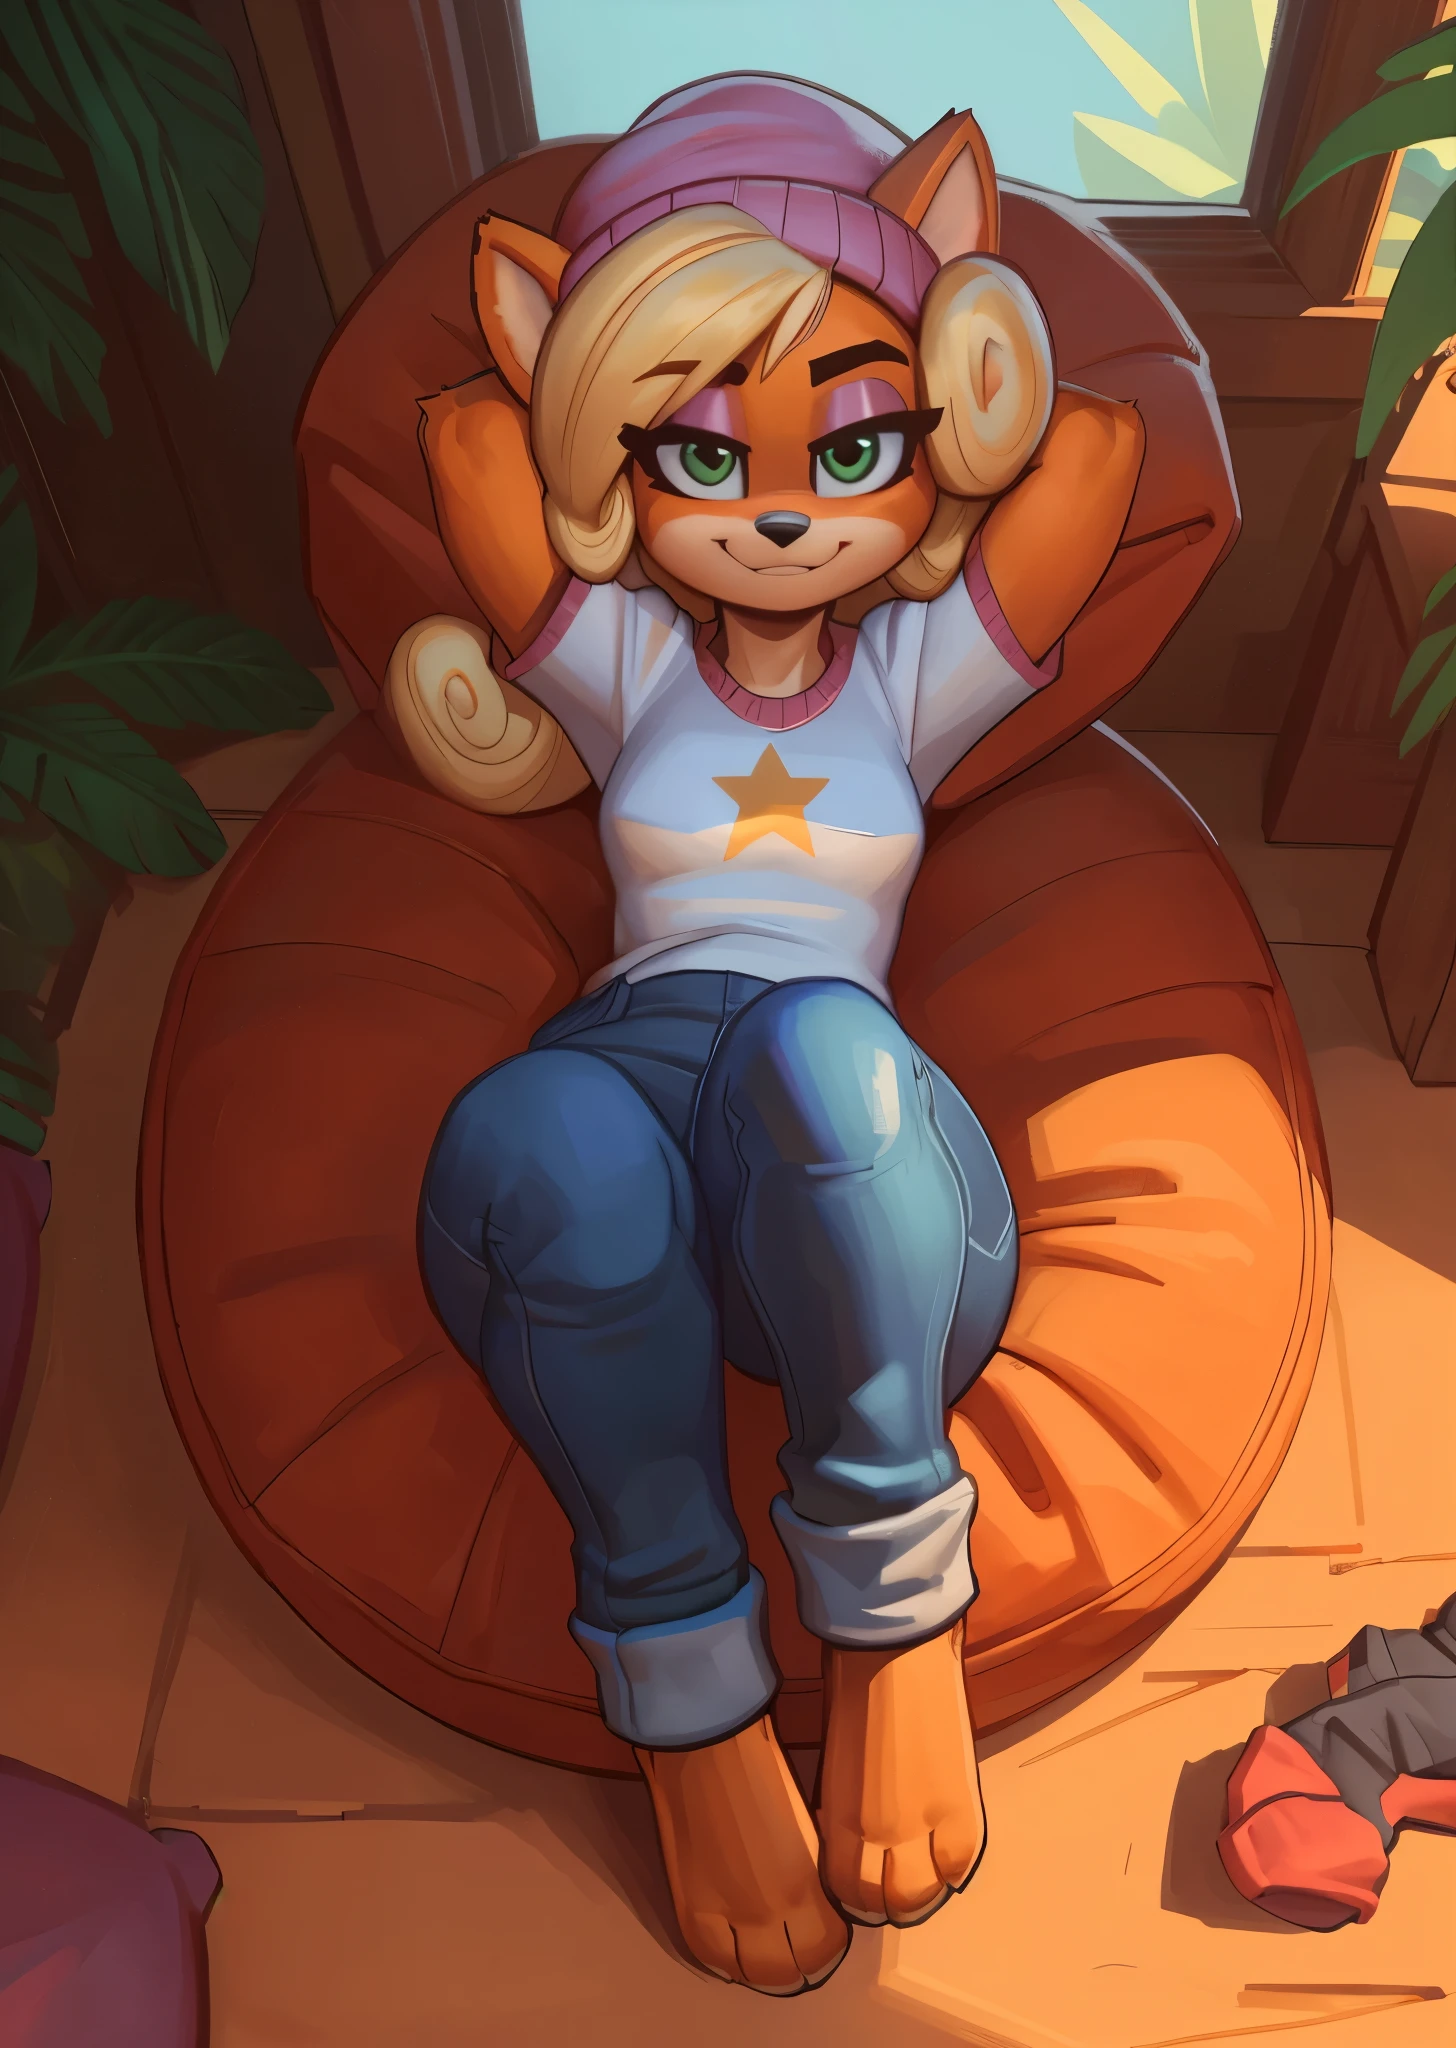 [Coco bandicoot], [Uploaded to e621.net; (Pixelsketcher), (wamudraws)], ((masterpiece)), ((HD)), ((solo portrait)), ((full body)), ((bird's-eye view)), ((feet visible)), ((furry; anthro)), ((detailed fur)), ((detailed shading)), ((beautiful render art)), ((intricate details)), {anthro; orange fur, black nose, (cute green eyes), (short eyelashes), (pink eyeshadow), (long blonde curly hair), (curvy hips), (beautiful legs), (beautiful paws), (blushing), (smug smirk)}, {white tee shirt), (yellow star printed on shirt), (tight jeans), (pink beanie)}, {(on beanbag), (hands behind head), (looking at viewer)}, [background; (tropical forest), (tree house), (window), (blue sky), (sun rays)]